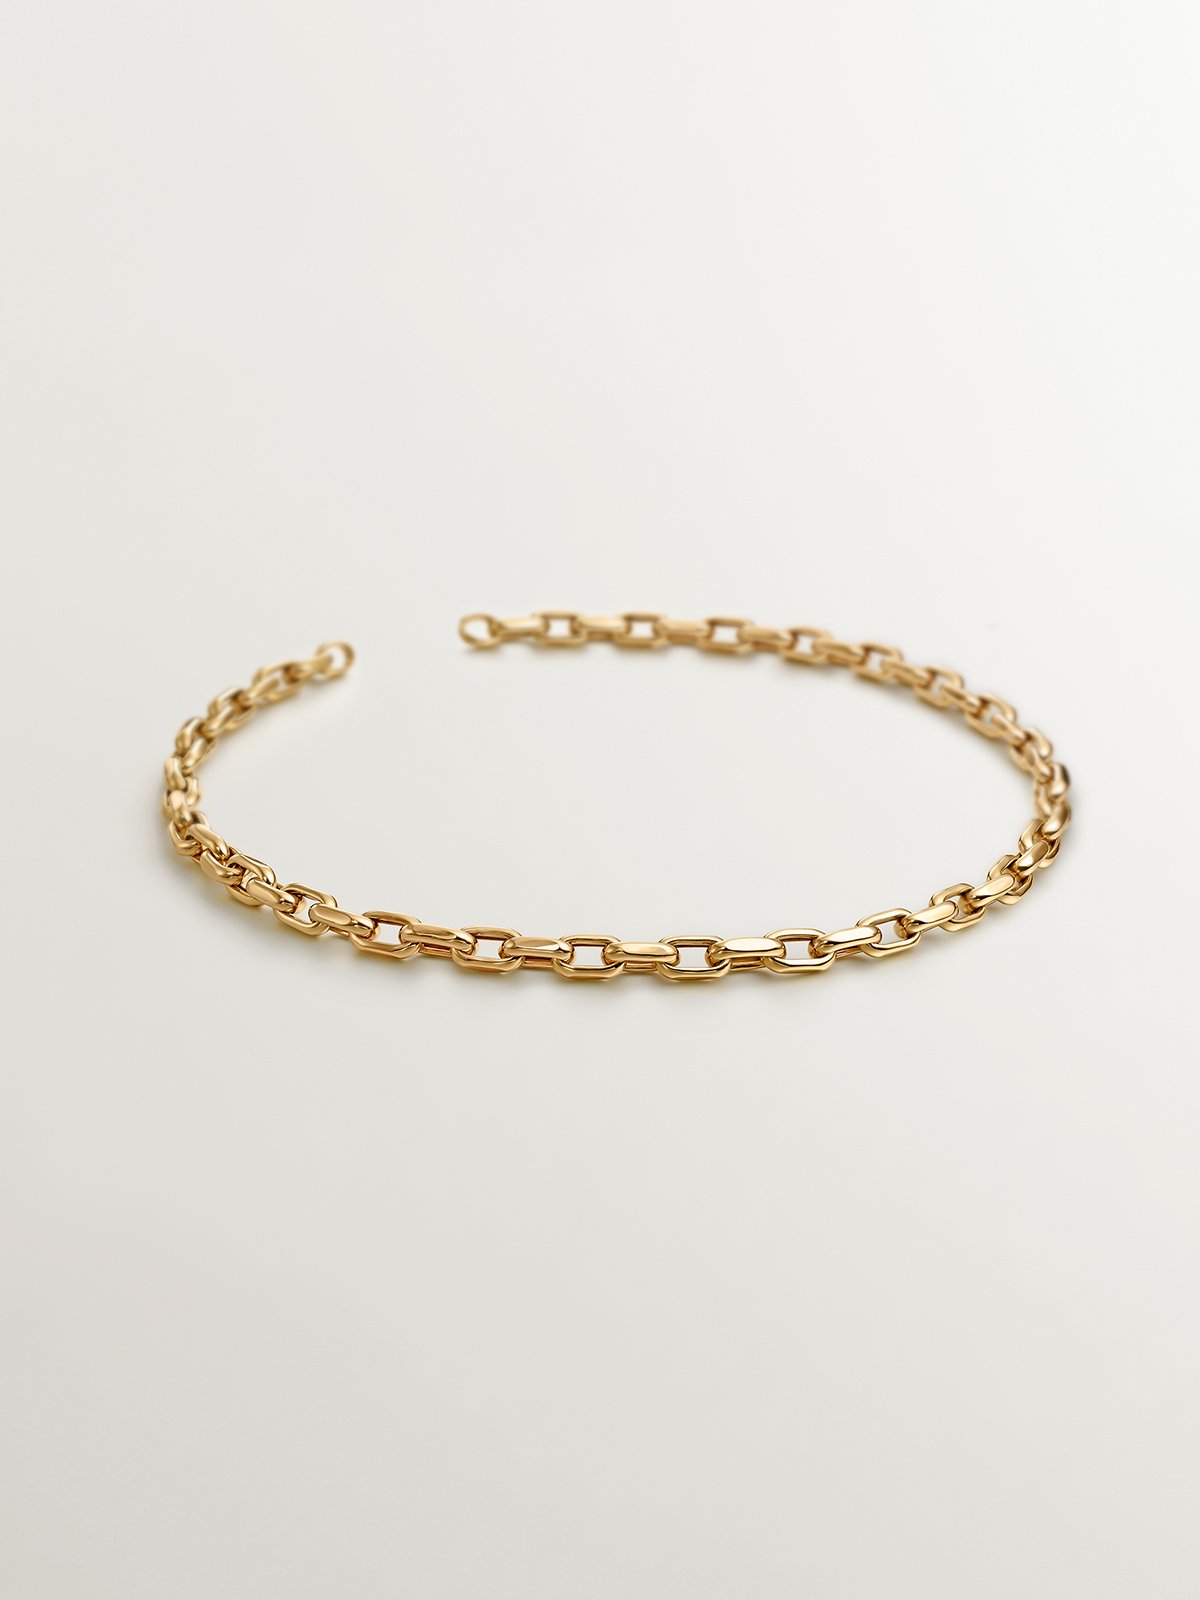 925 Silver Forza link necklace bathed in 18K yellow gold 45cm